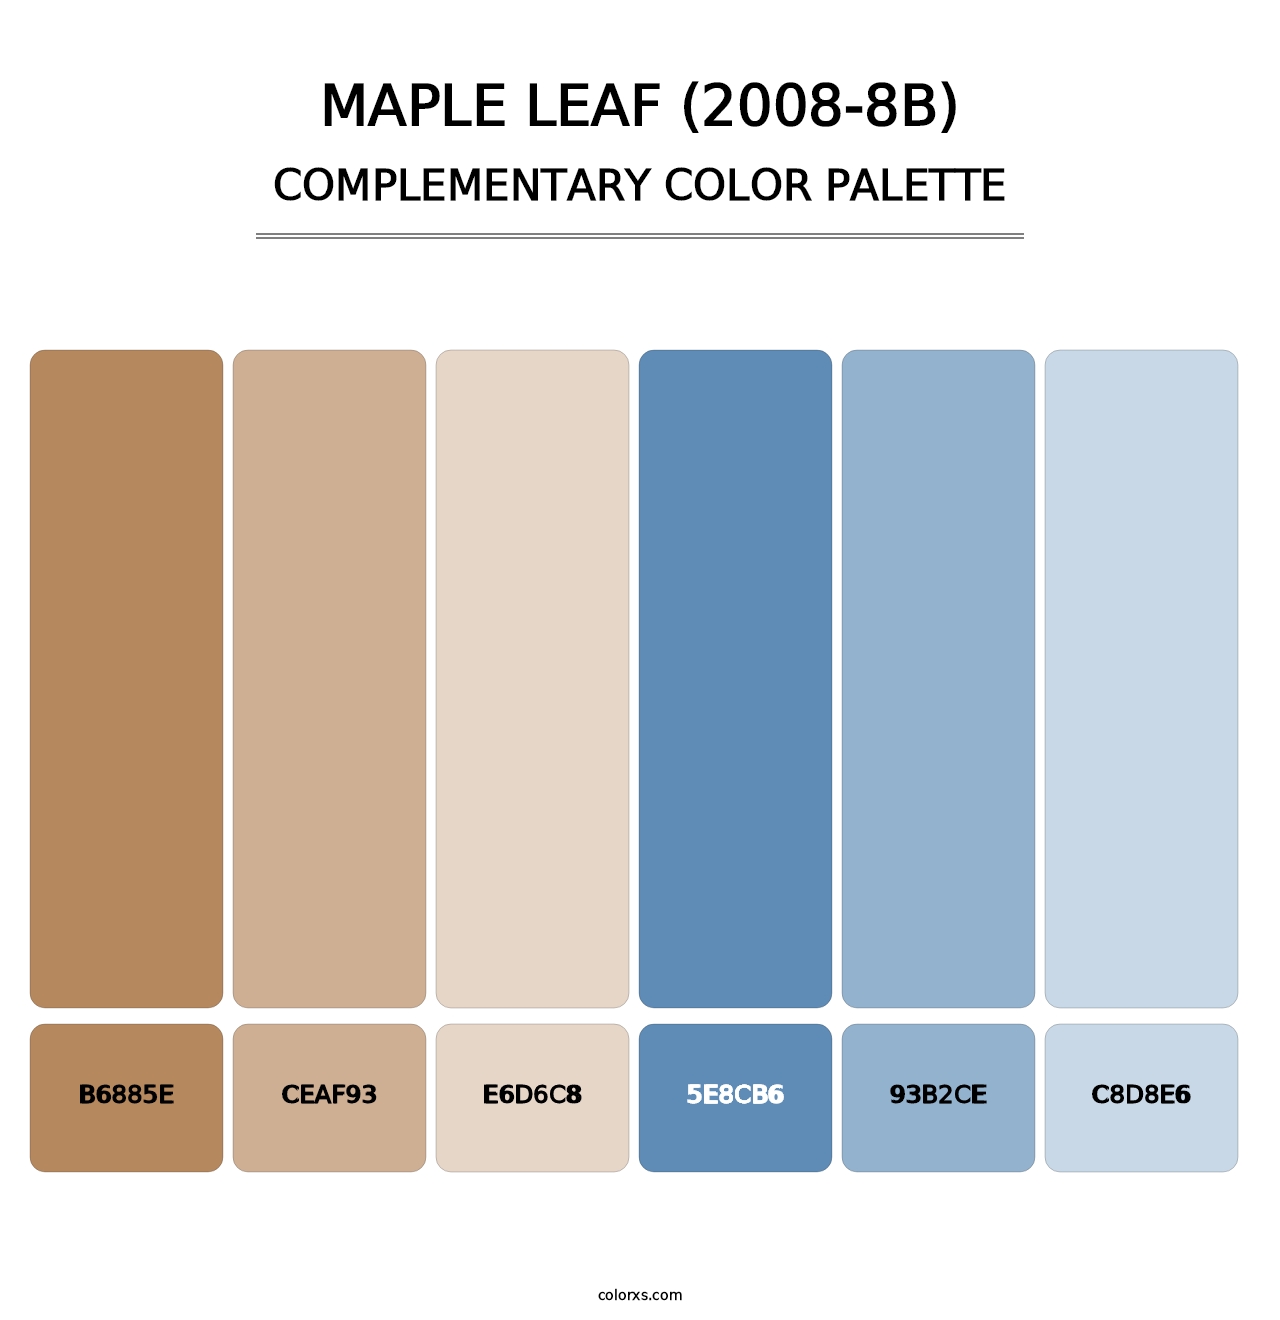 Maple Leaf (2008-8B) - Complementary Color Palette